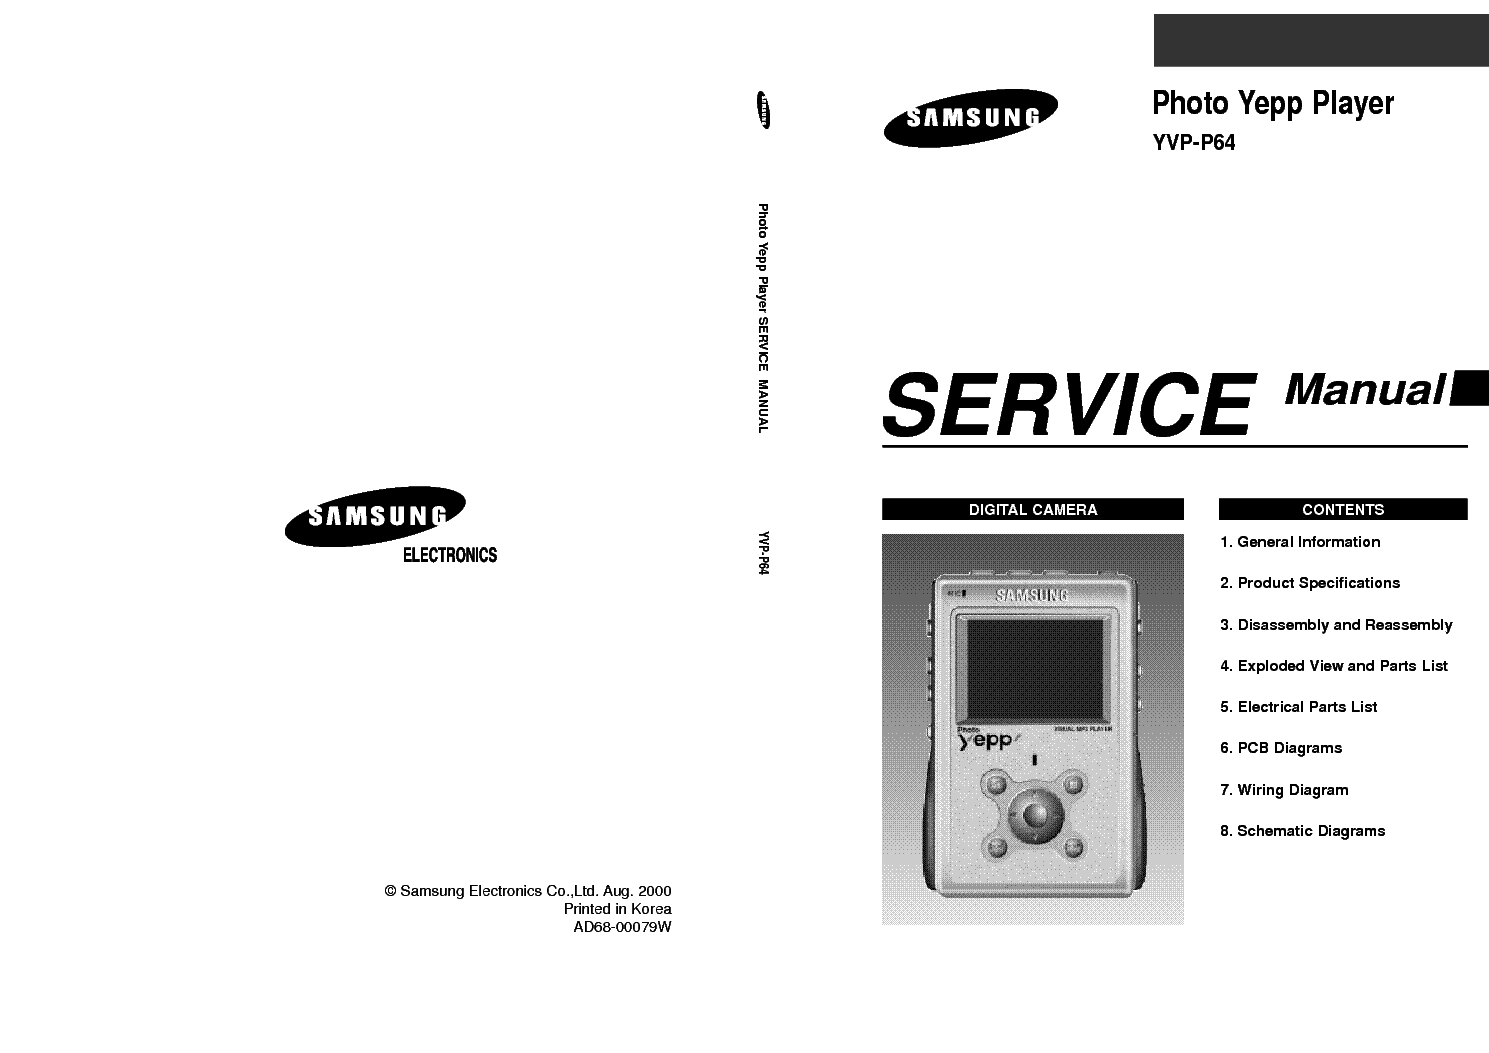 SAMSUNG YVP-P64 service manual (1st page)